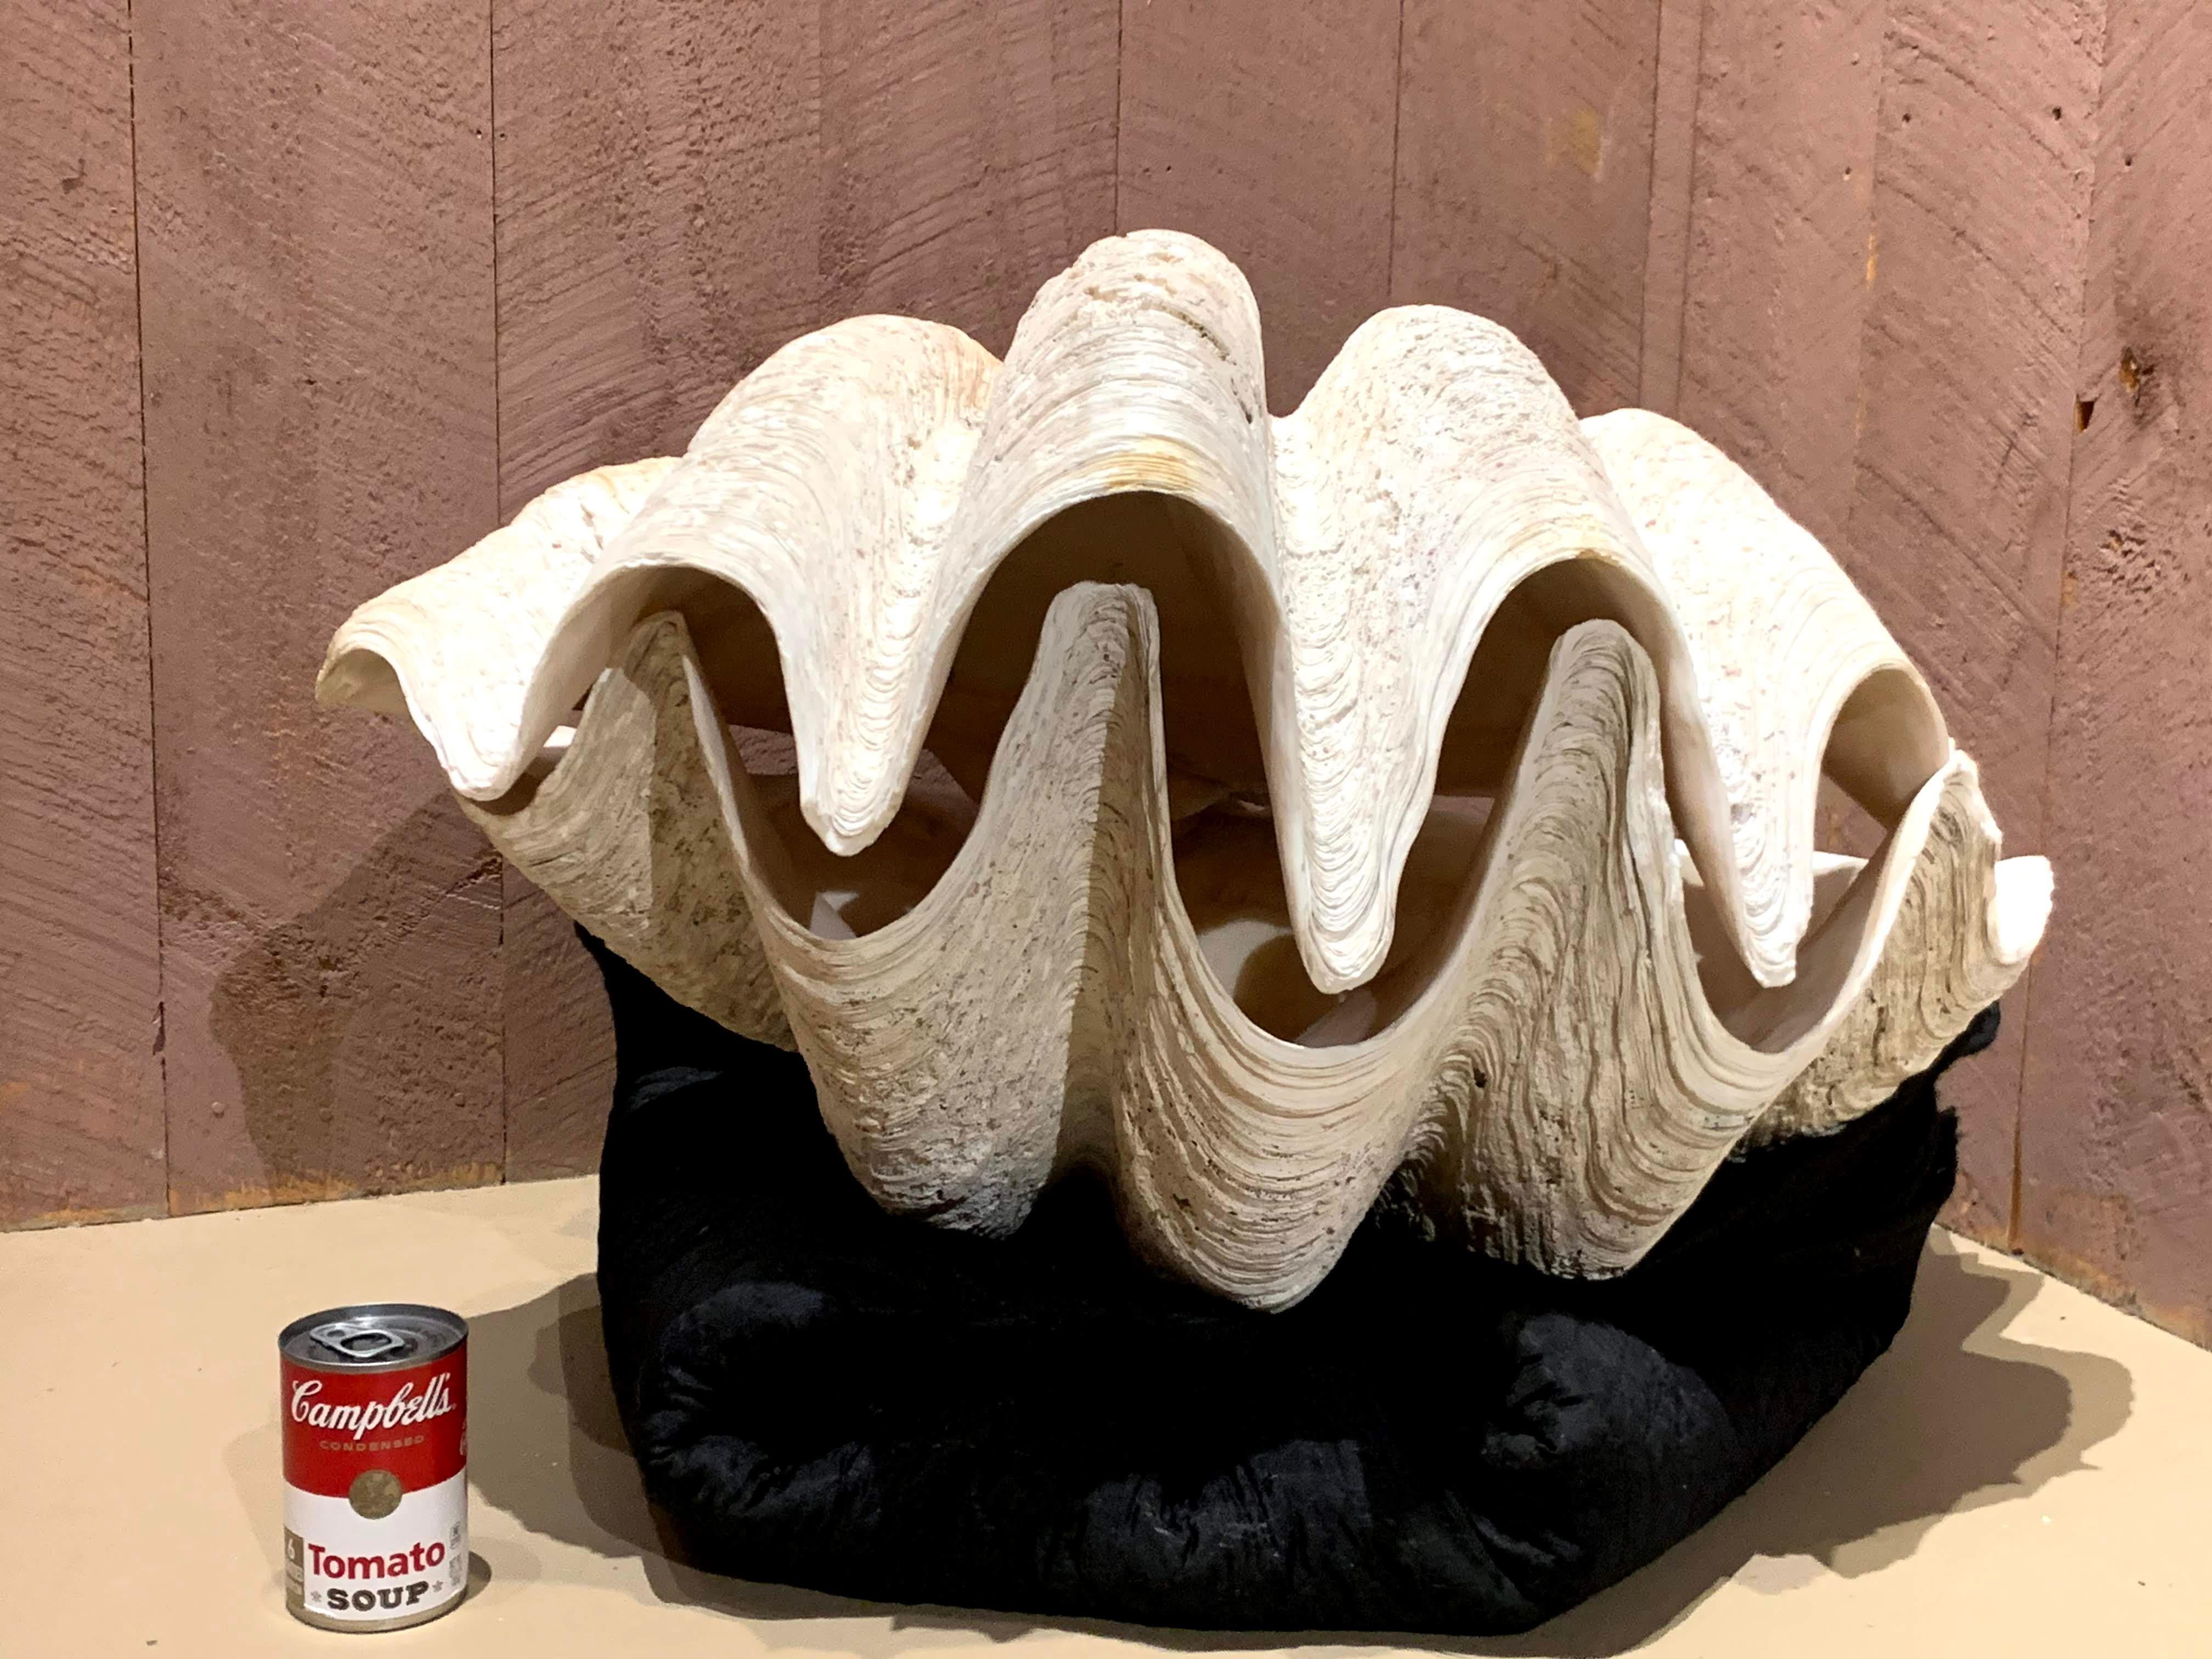 A monumental matching pair of Tridacna Gigas or giant clamshells. The giant clams are the members of the clam genus Tridacna that are the largest living bivalve mollusks. This hard to find pair is probably of South Pacific origin and is in very good